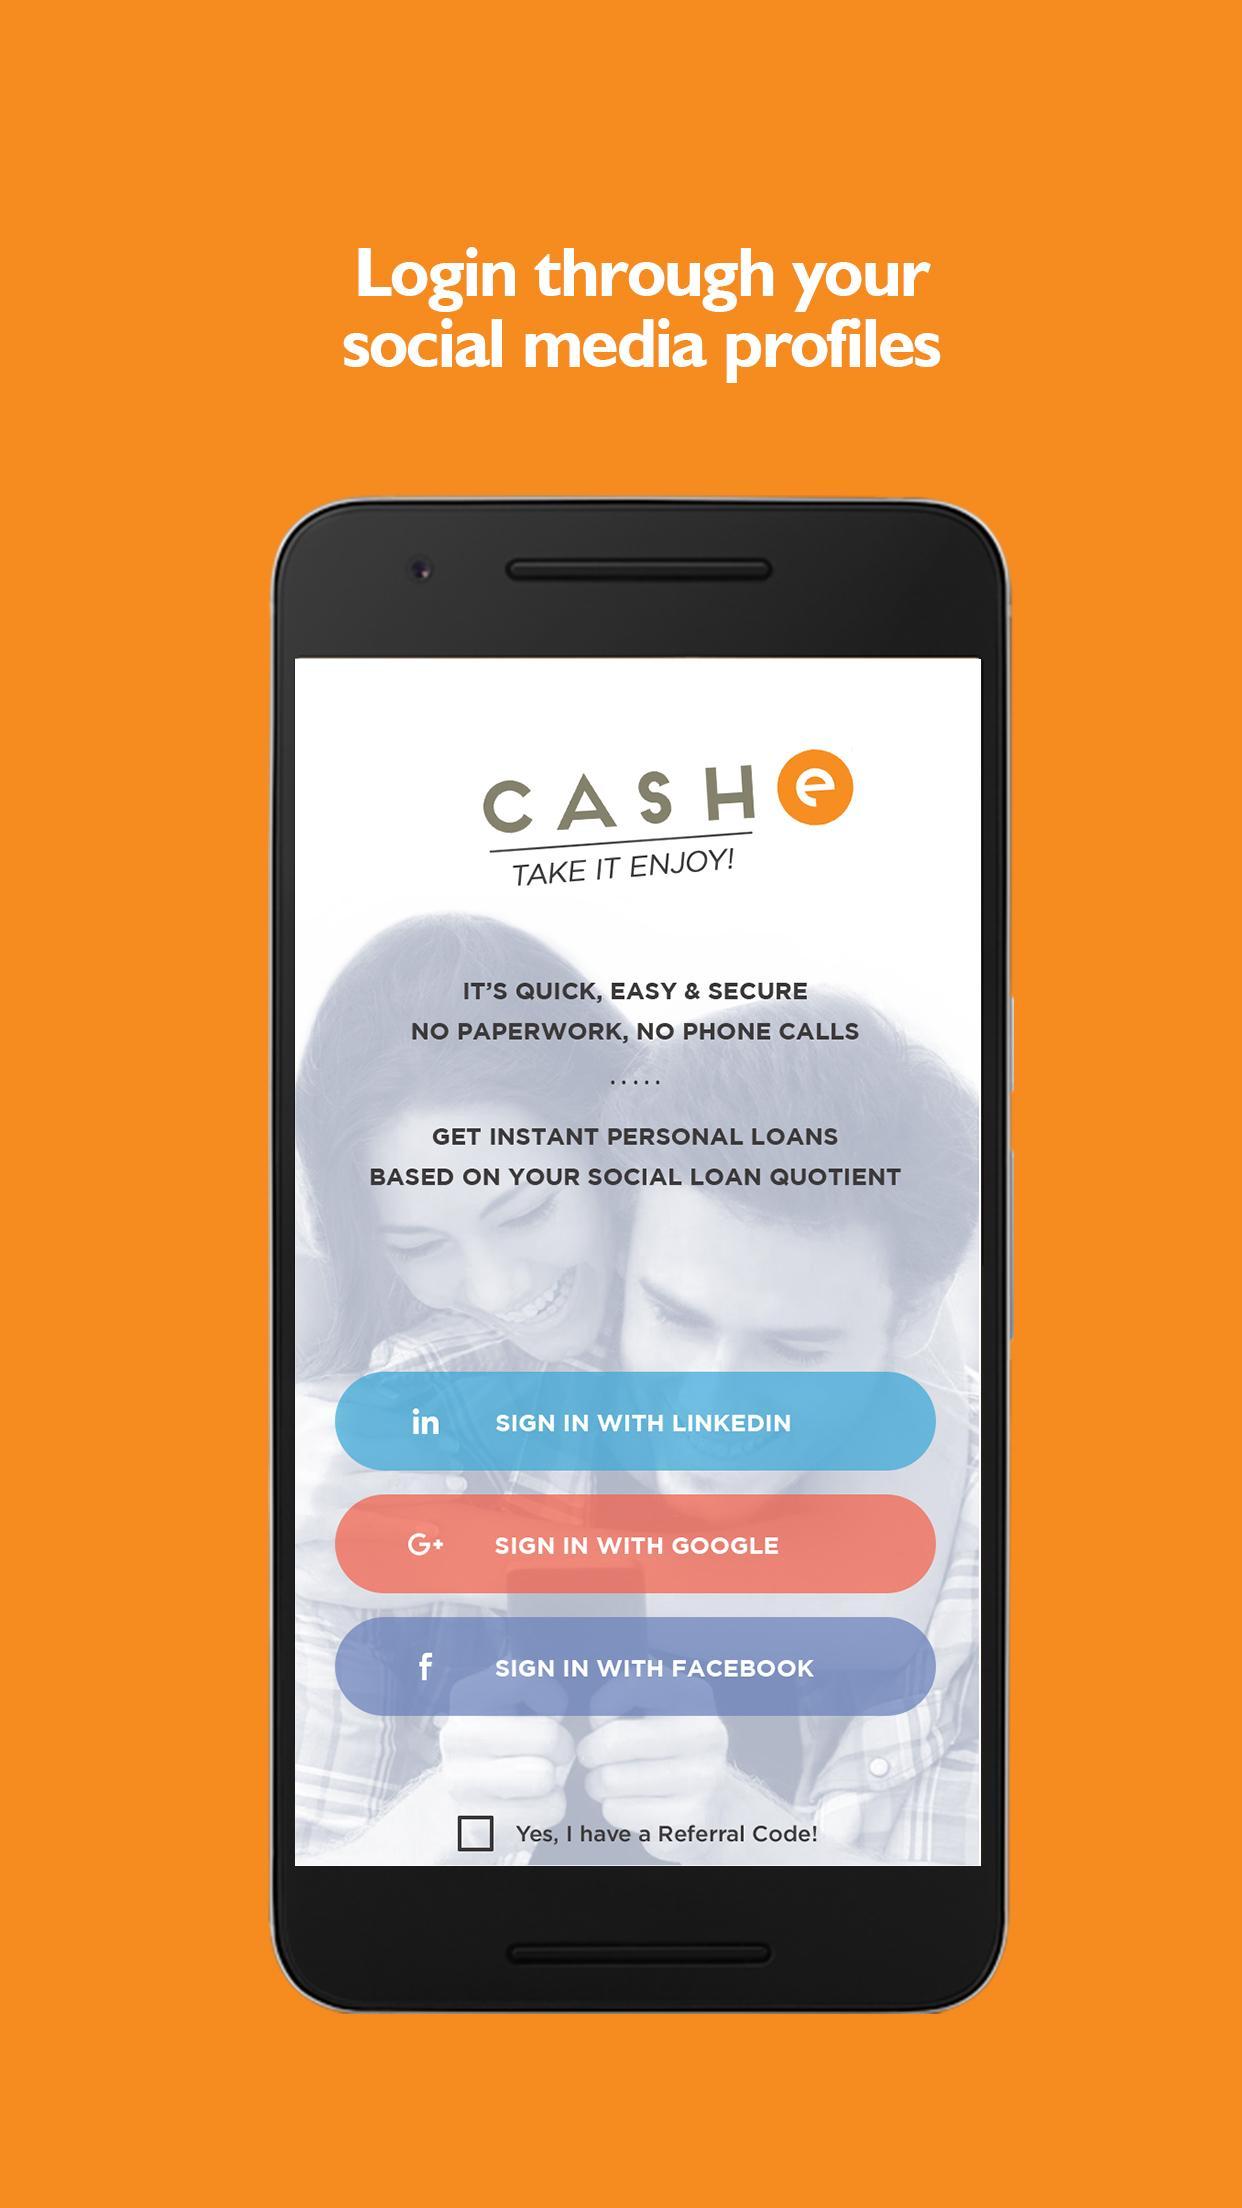 Instant Loan App with Quick Cash Approval - CASHe 8.5.5 Screenshot 2